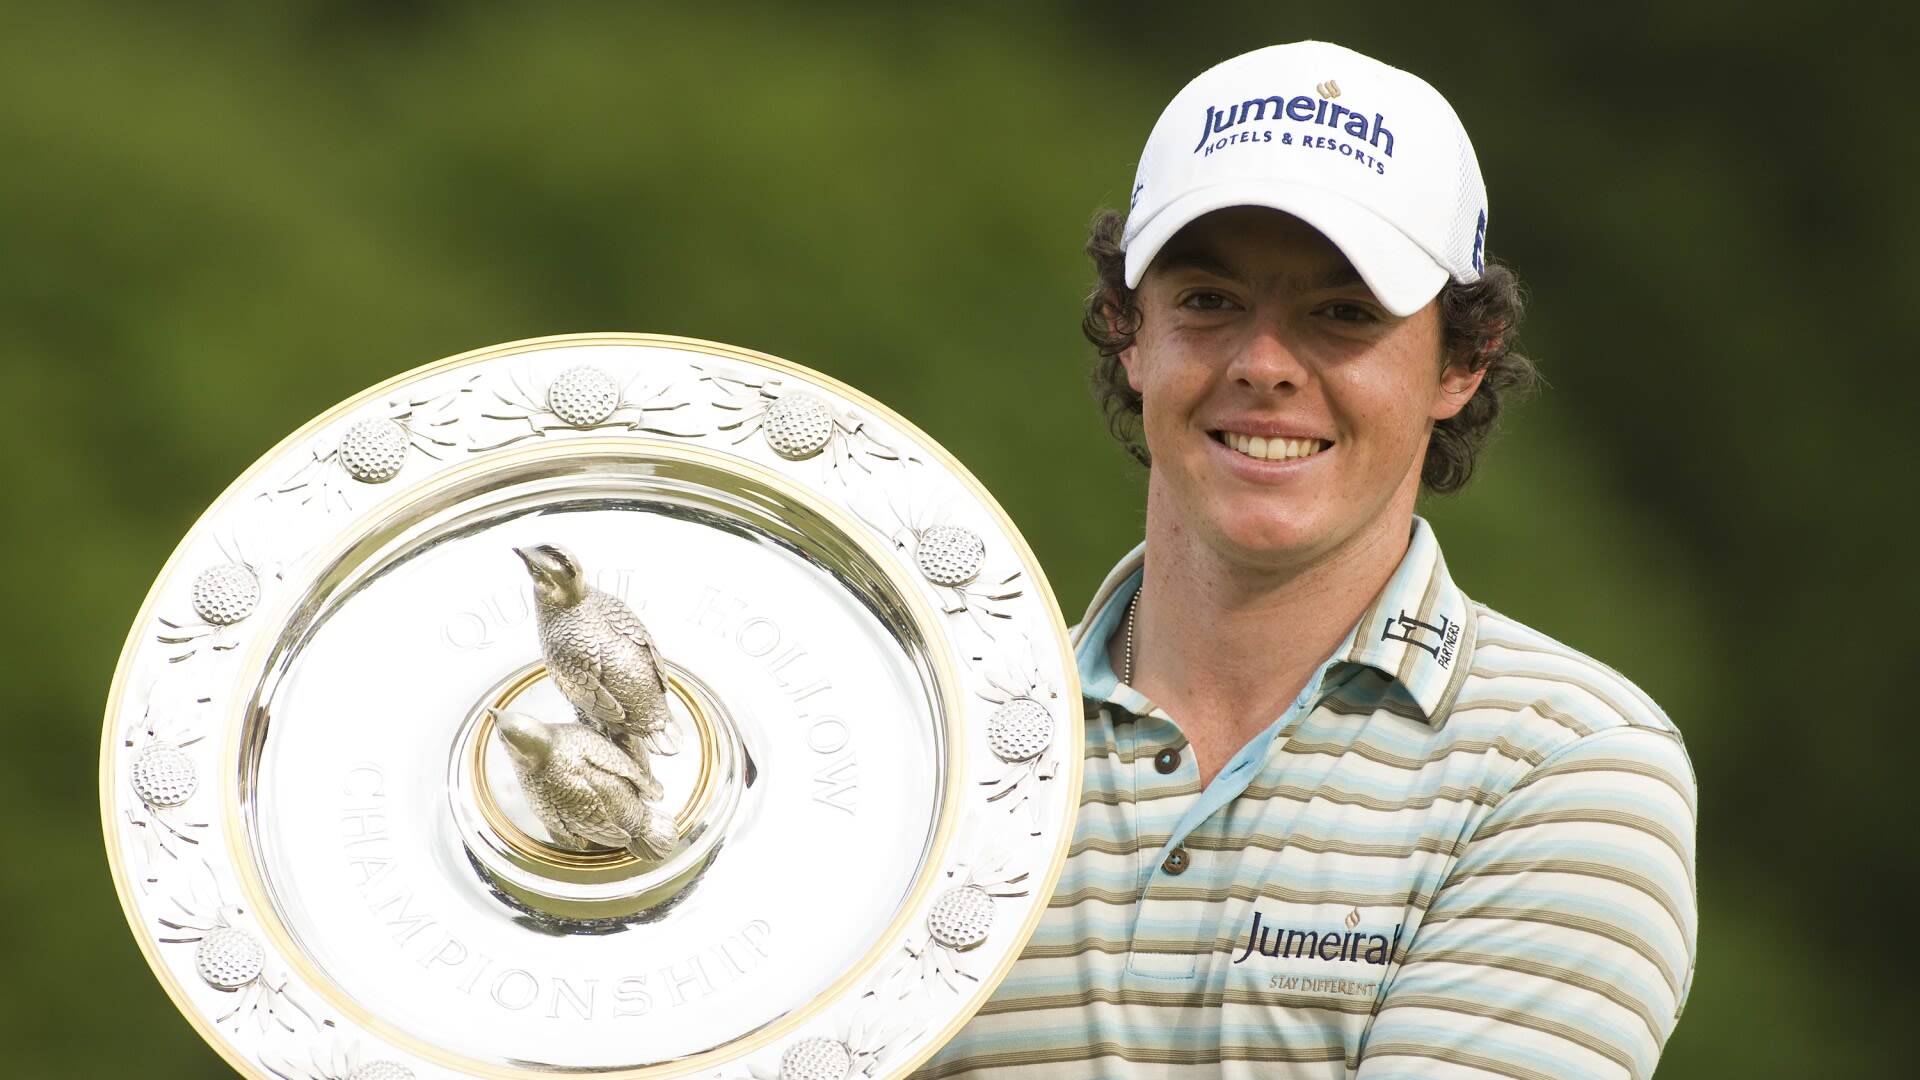 Rory McIlroy's career PGA Tour wins: A list of every event McIlroy has won on Tour